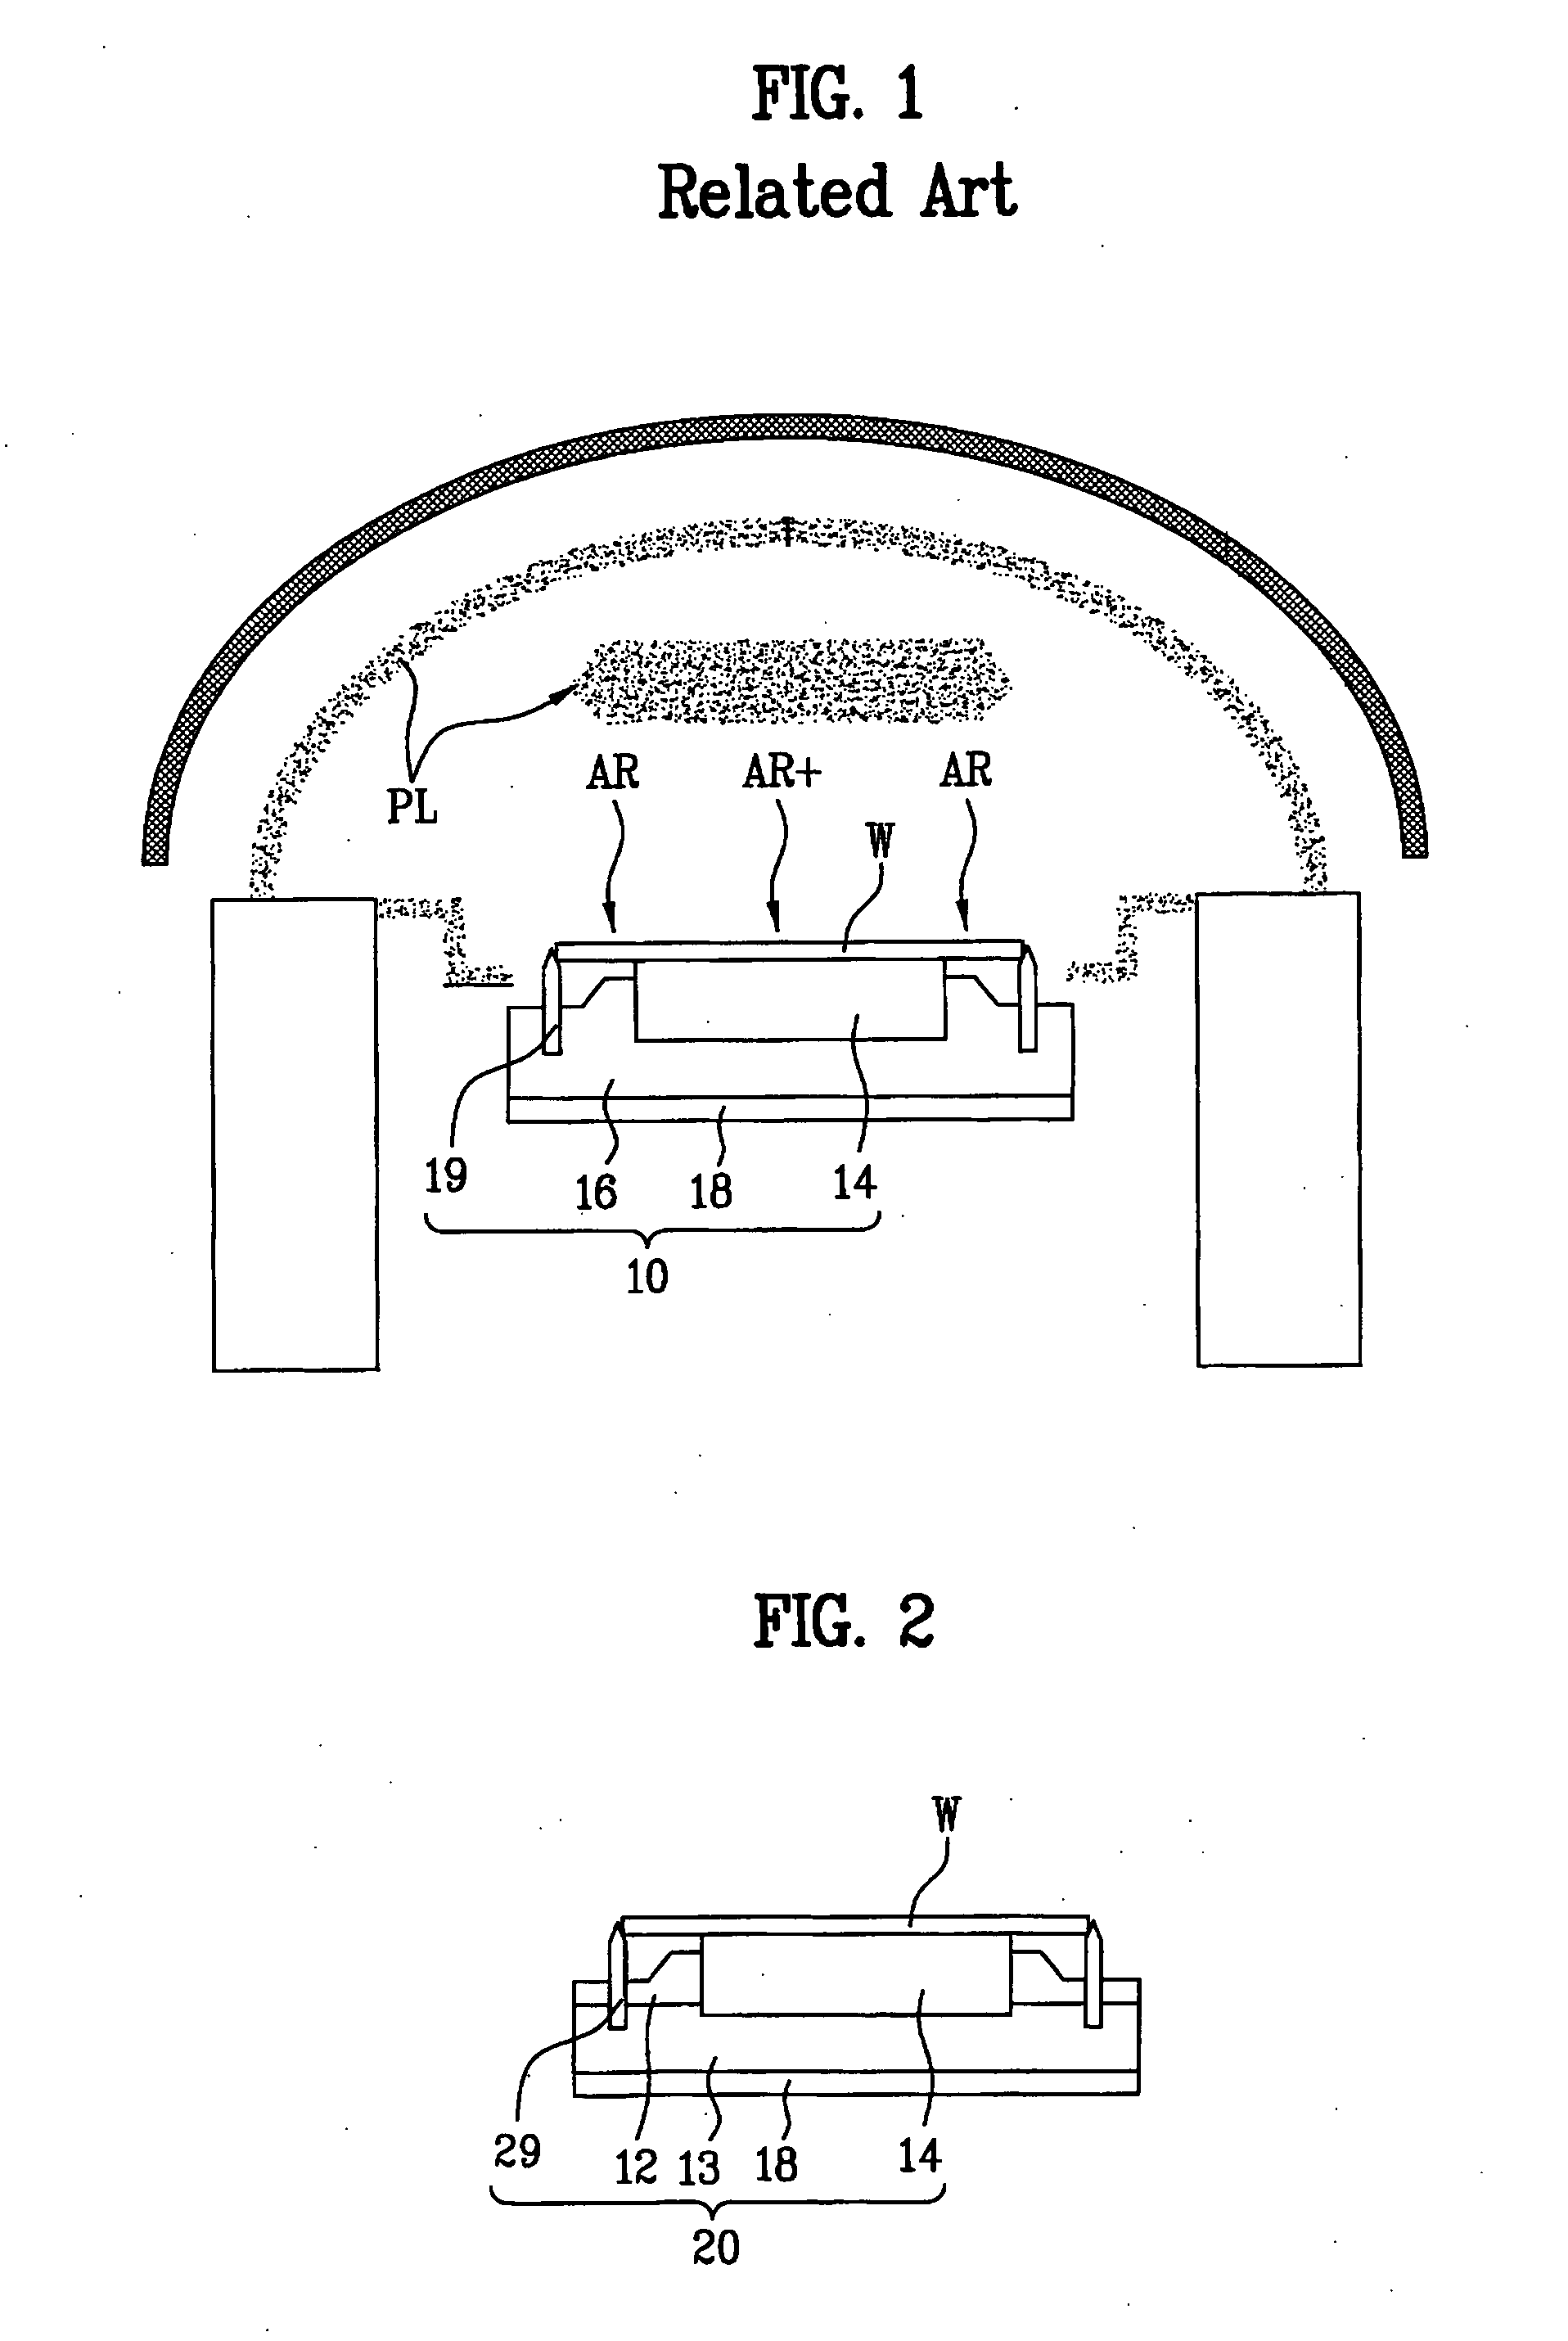 Dry etching apparatus